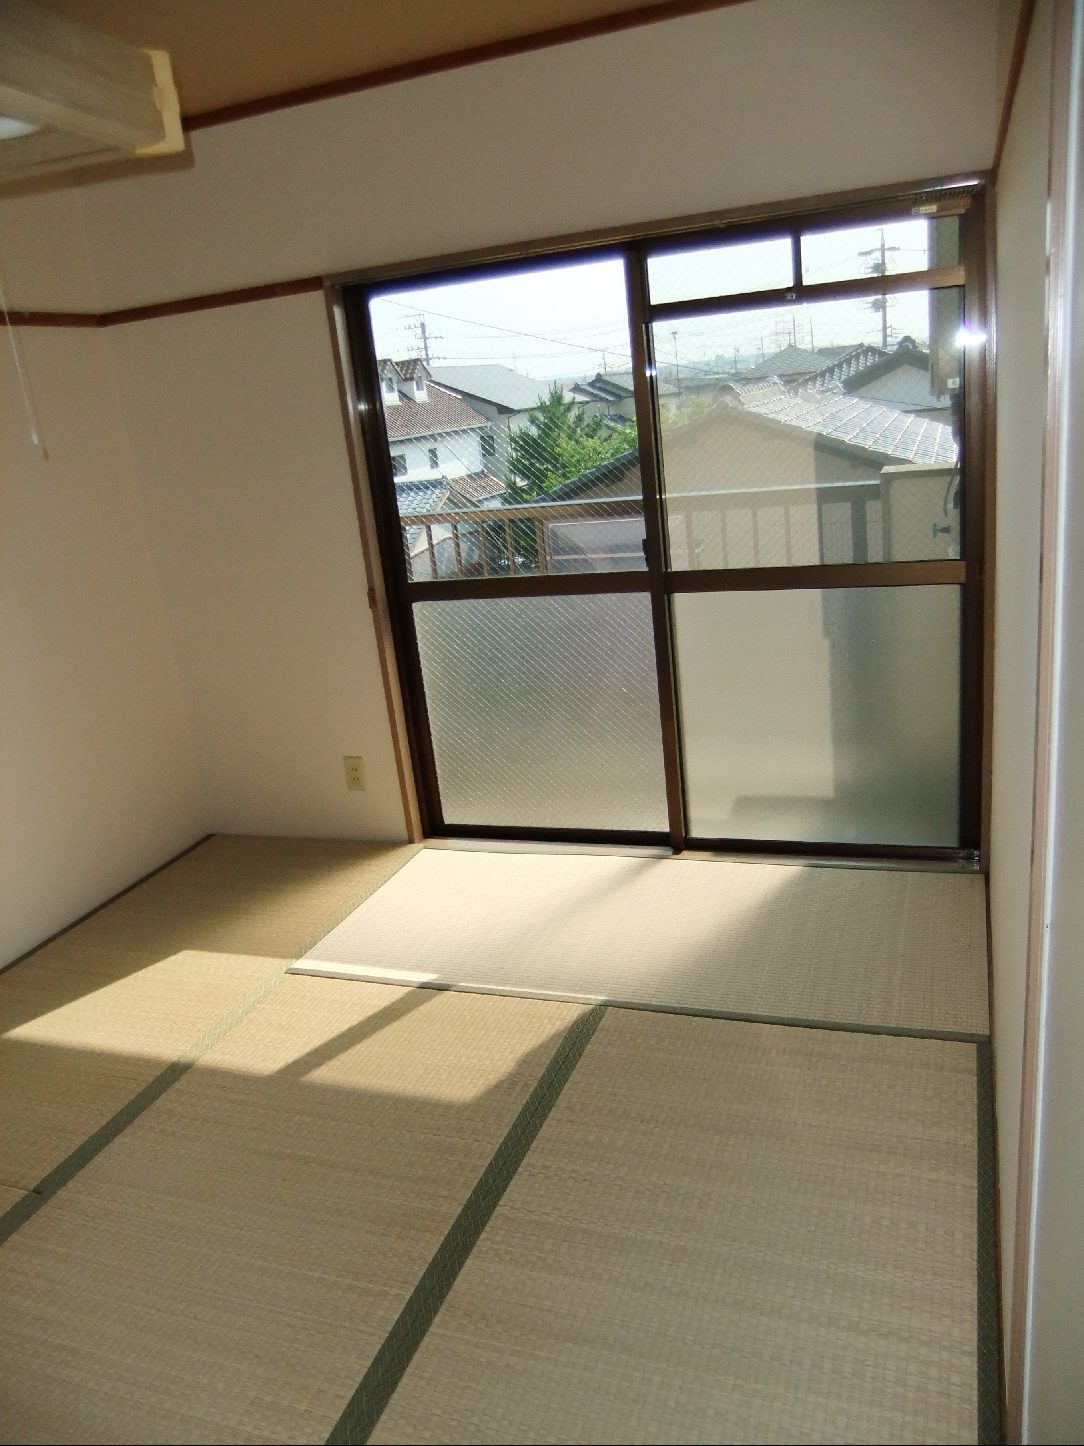 Living and room. It rubbed also good Japanese-style room.